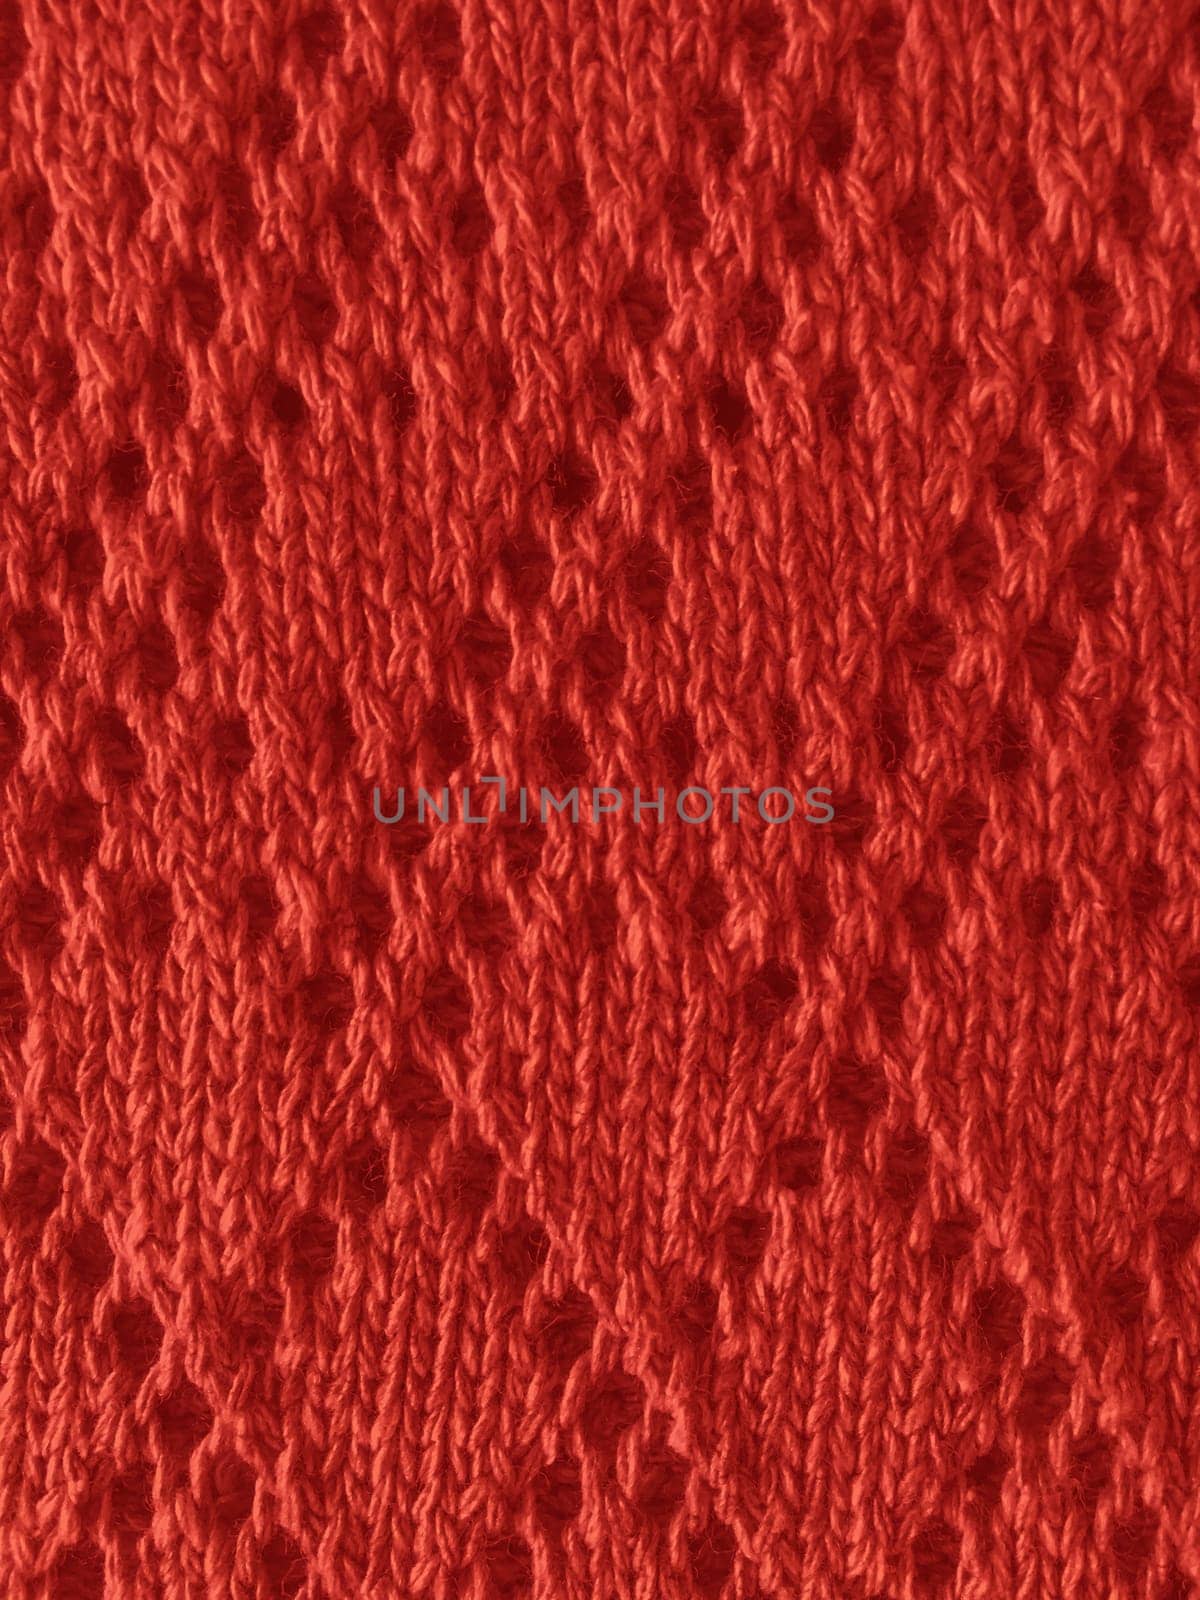 Christmas Knitted Texture. Vintage Wool Design. Weave Handmade Thread Material. Xmas Knitted Background. Organic Linen Jumper. Closeup Nordic Cashmere. Red Christmas Knitting Pattern.